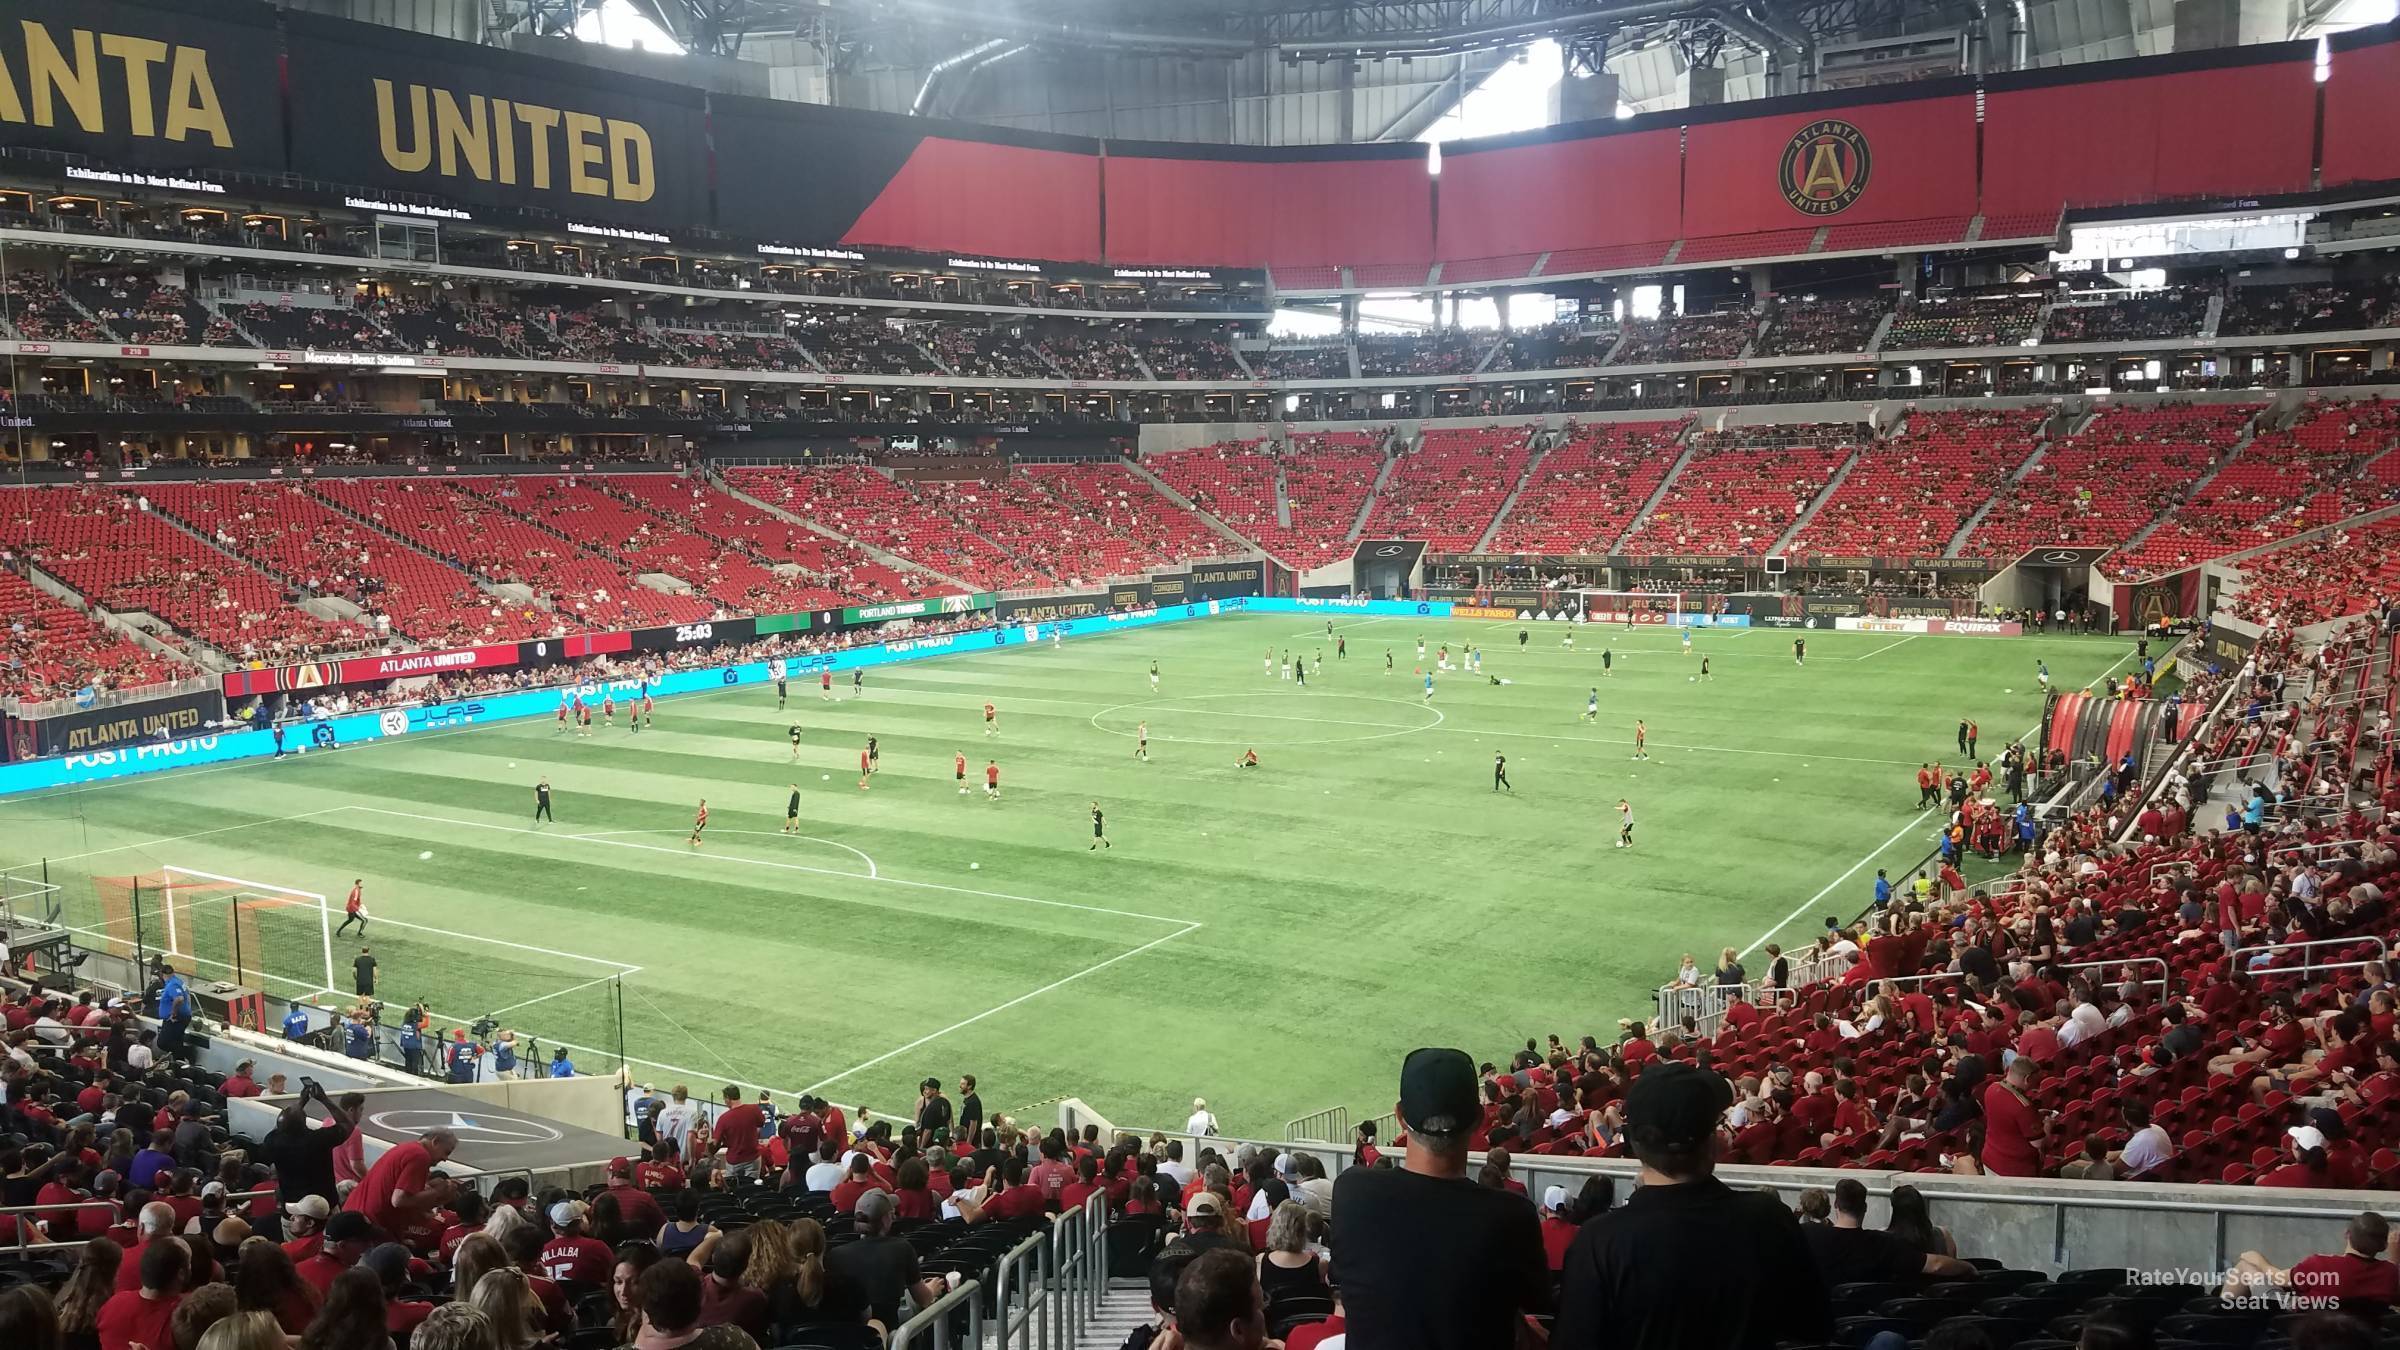 section 134, row 40 seat view  for soccer - mercedes-benz stadium